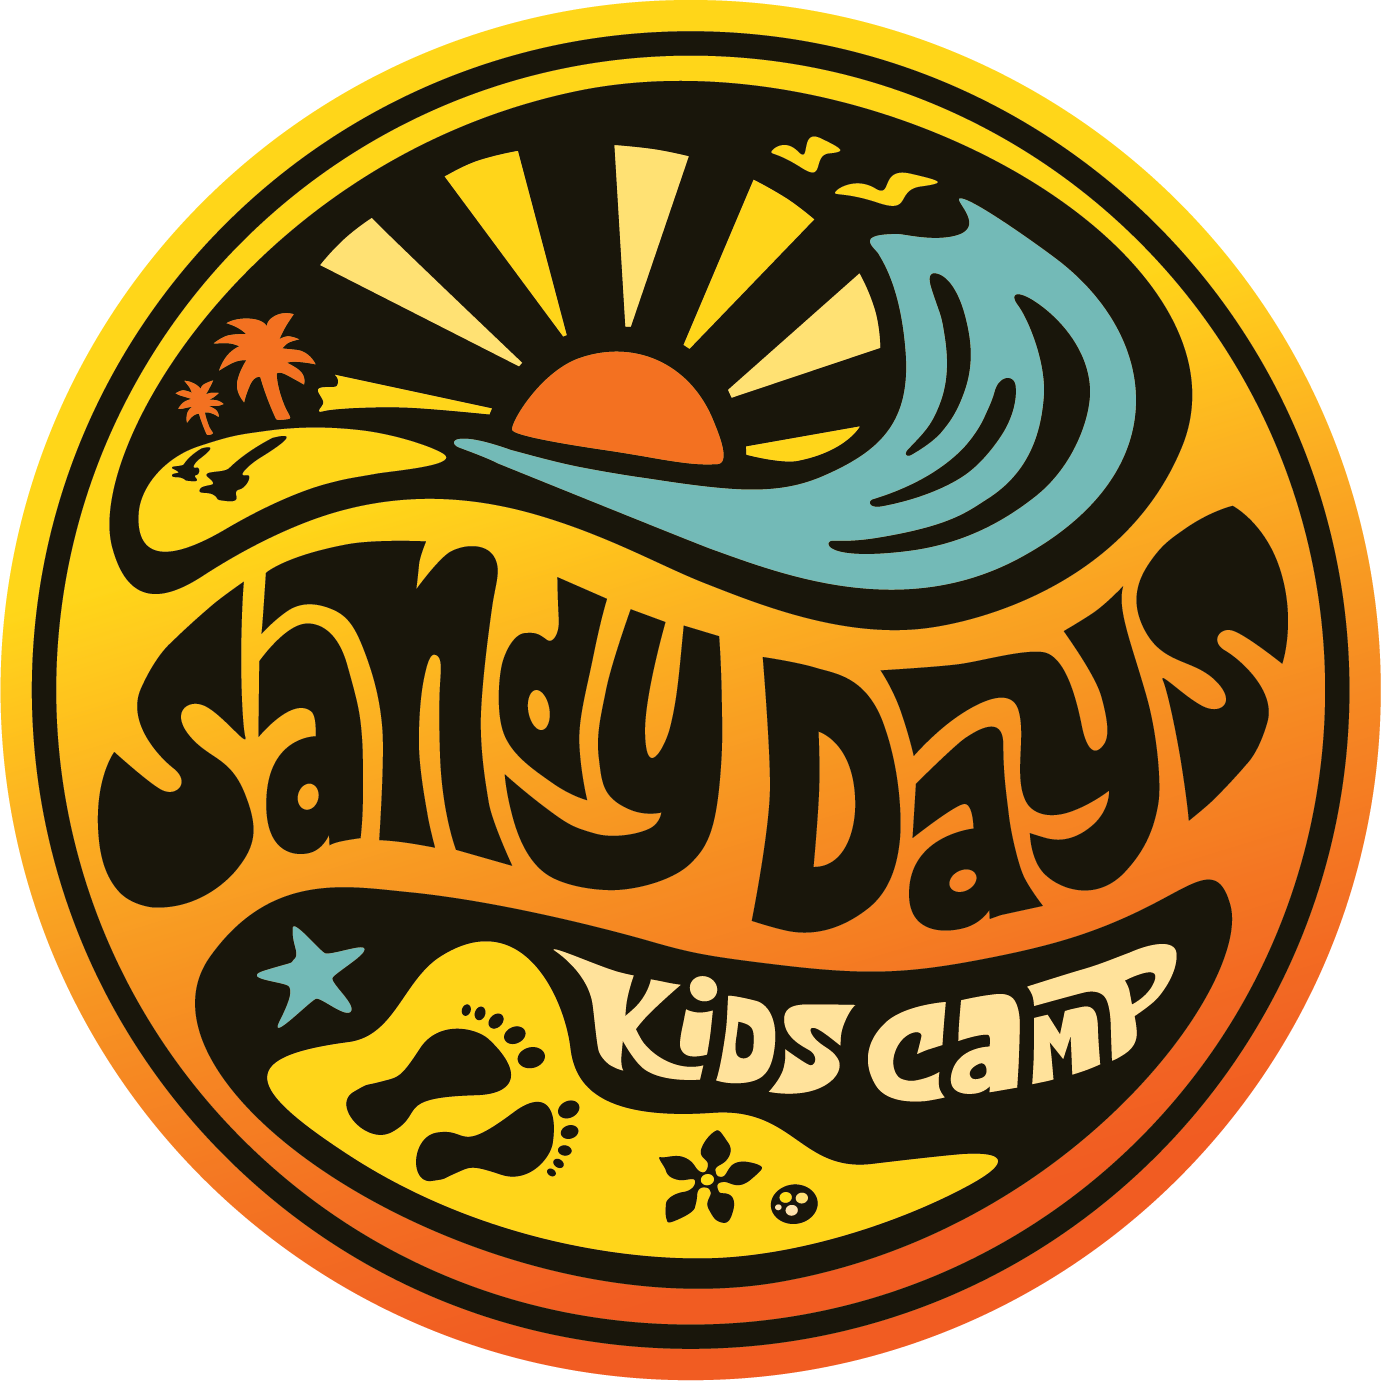 Colorful "Sandy Days Kids Camp" logo with sun and wave.